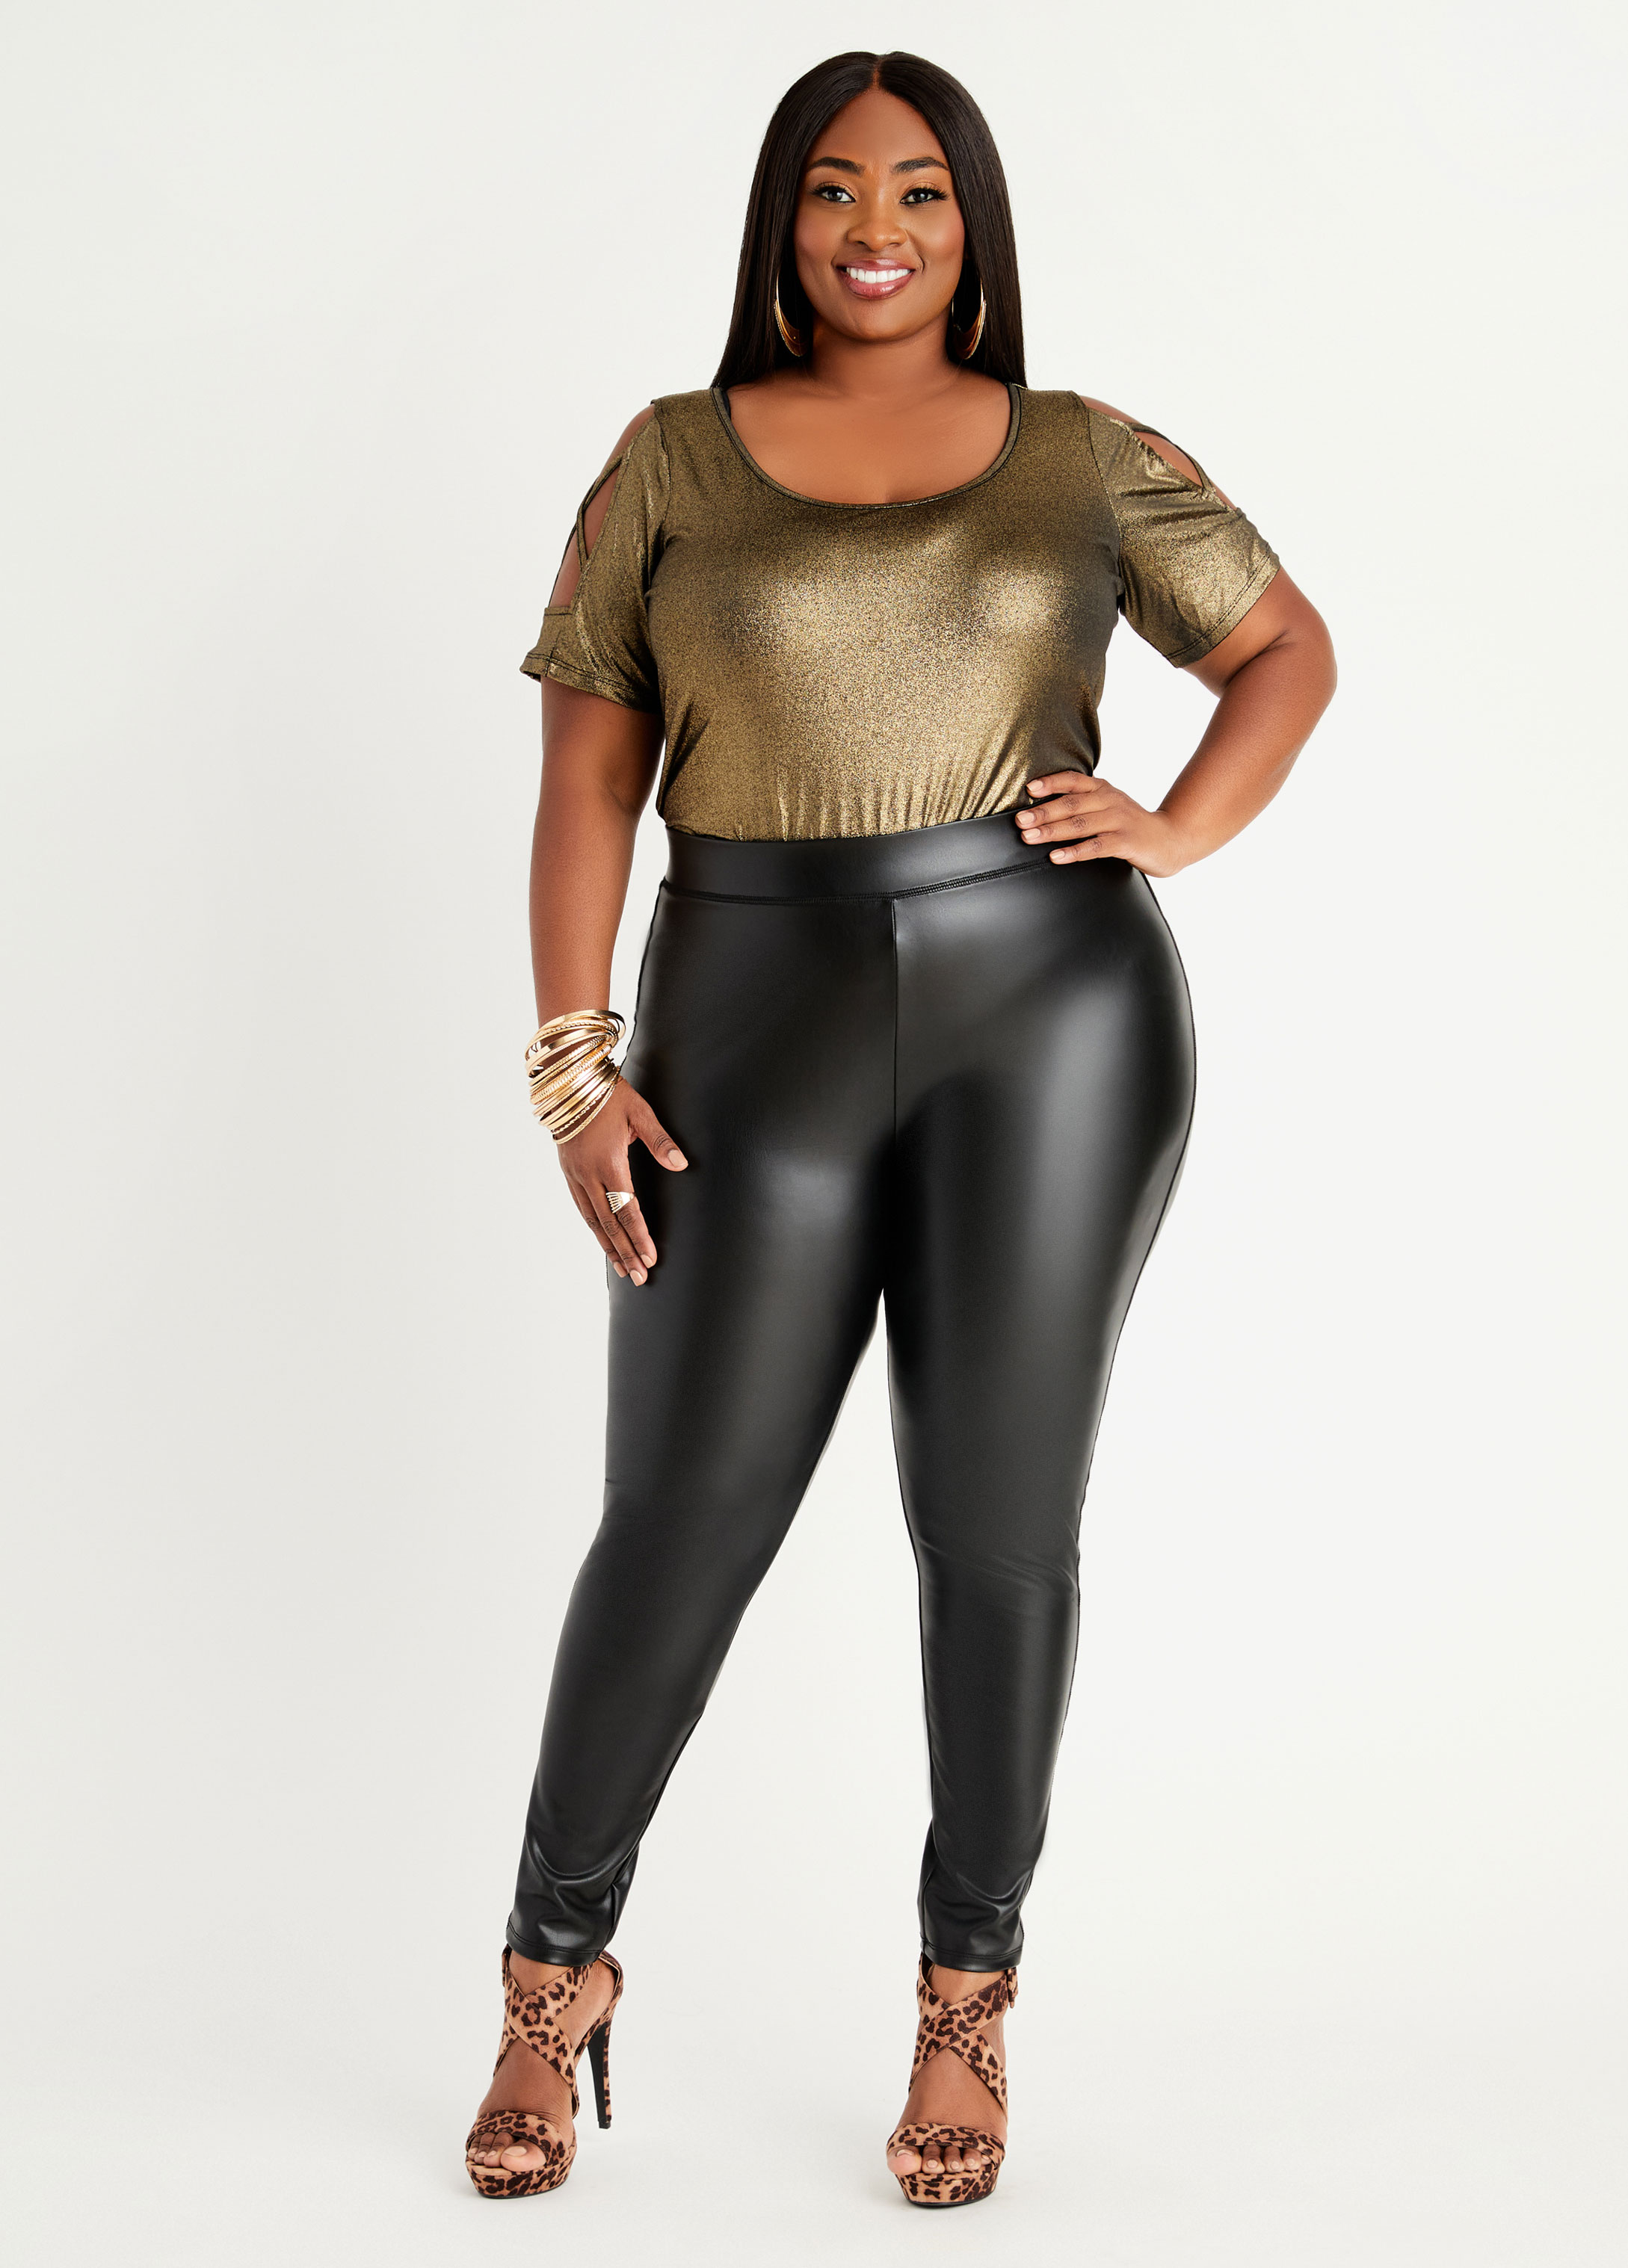 Leather Leggings - From S to PLUS SIZE (S-5XL) 